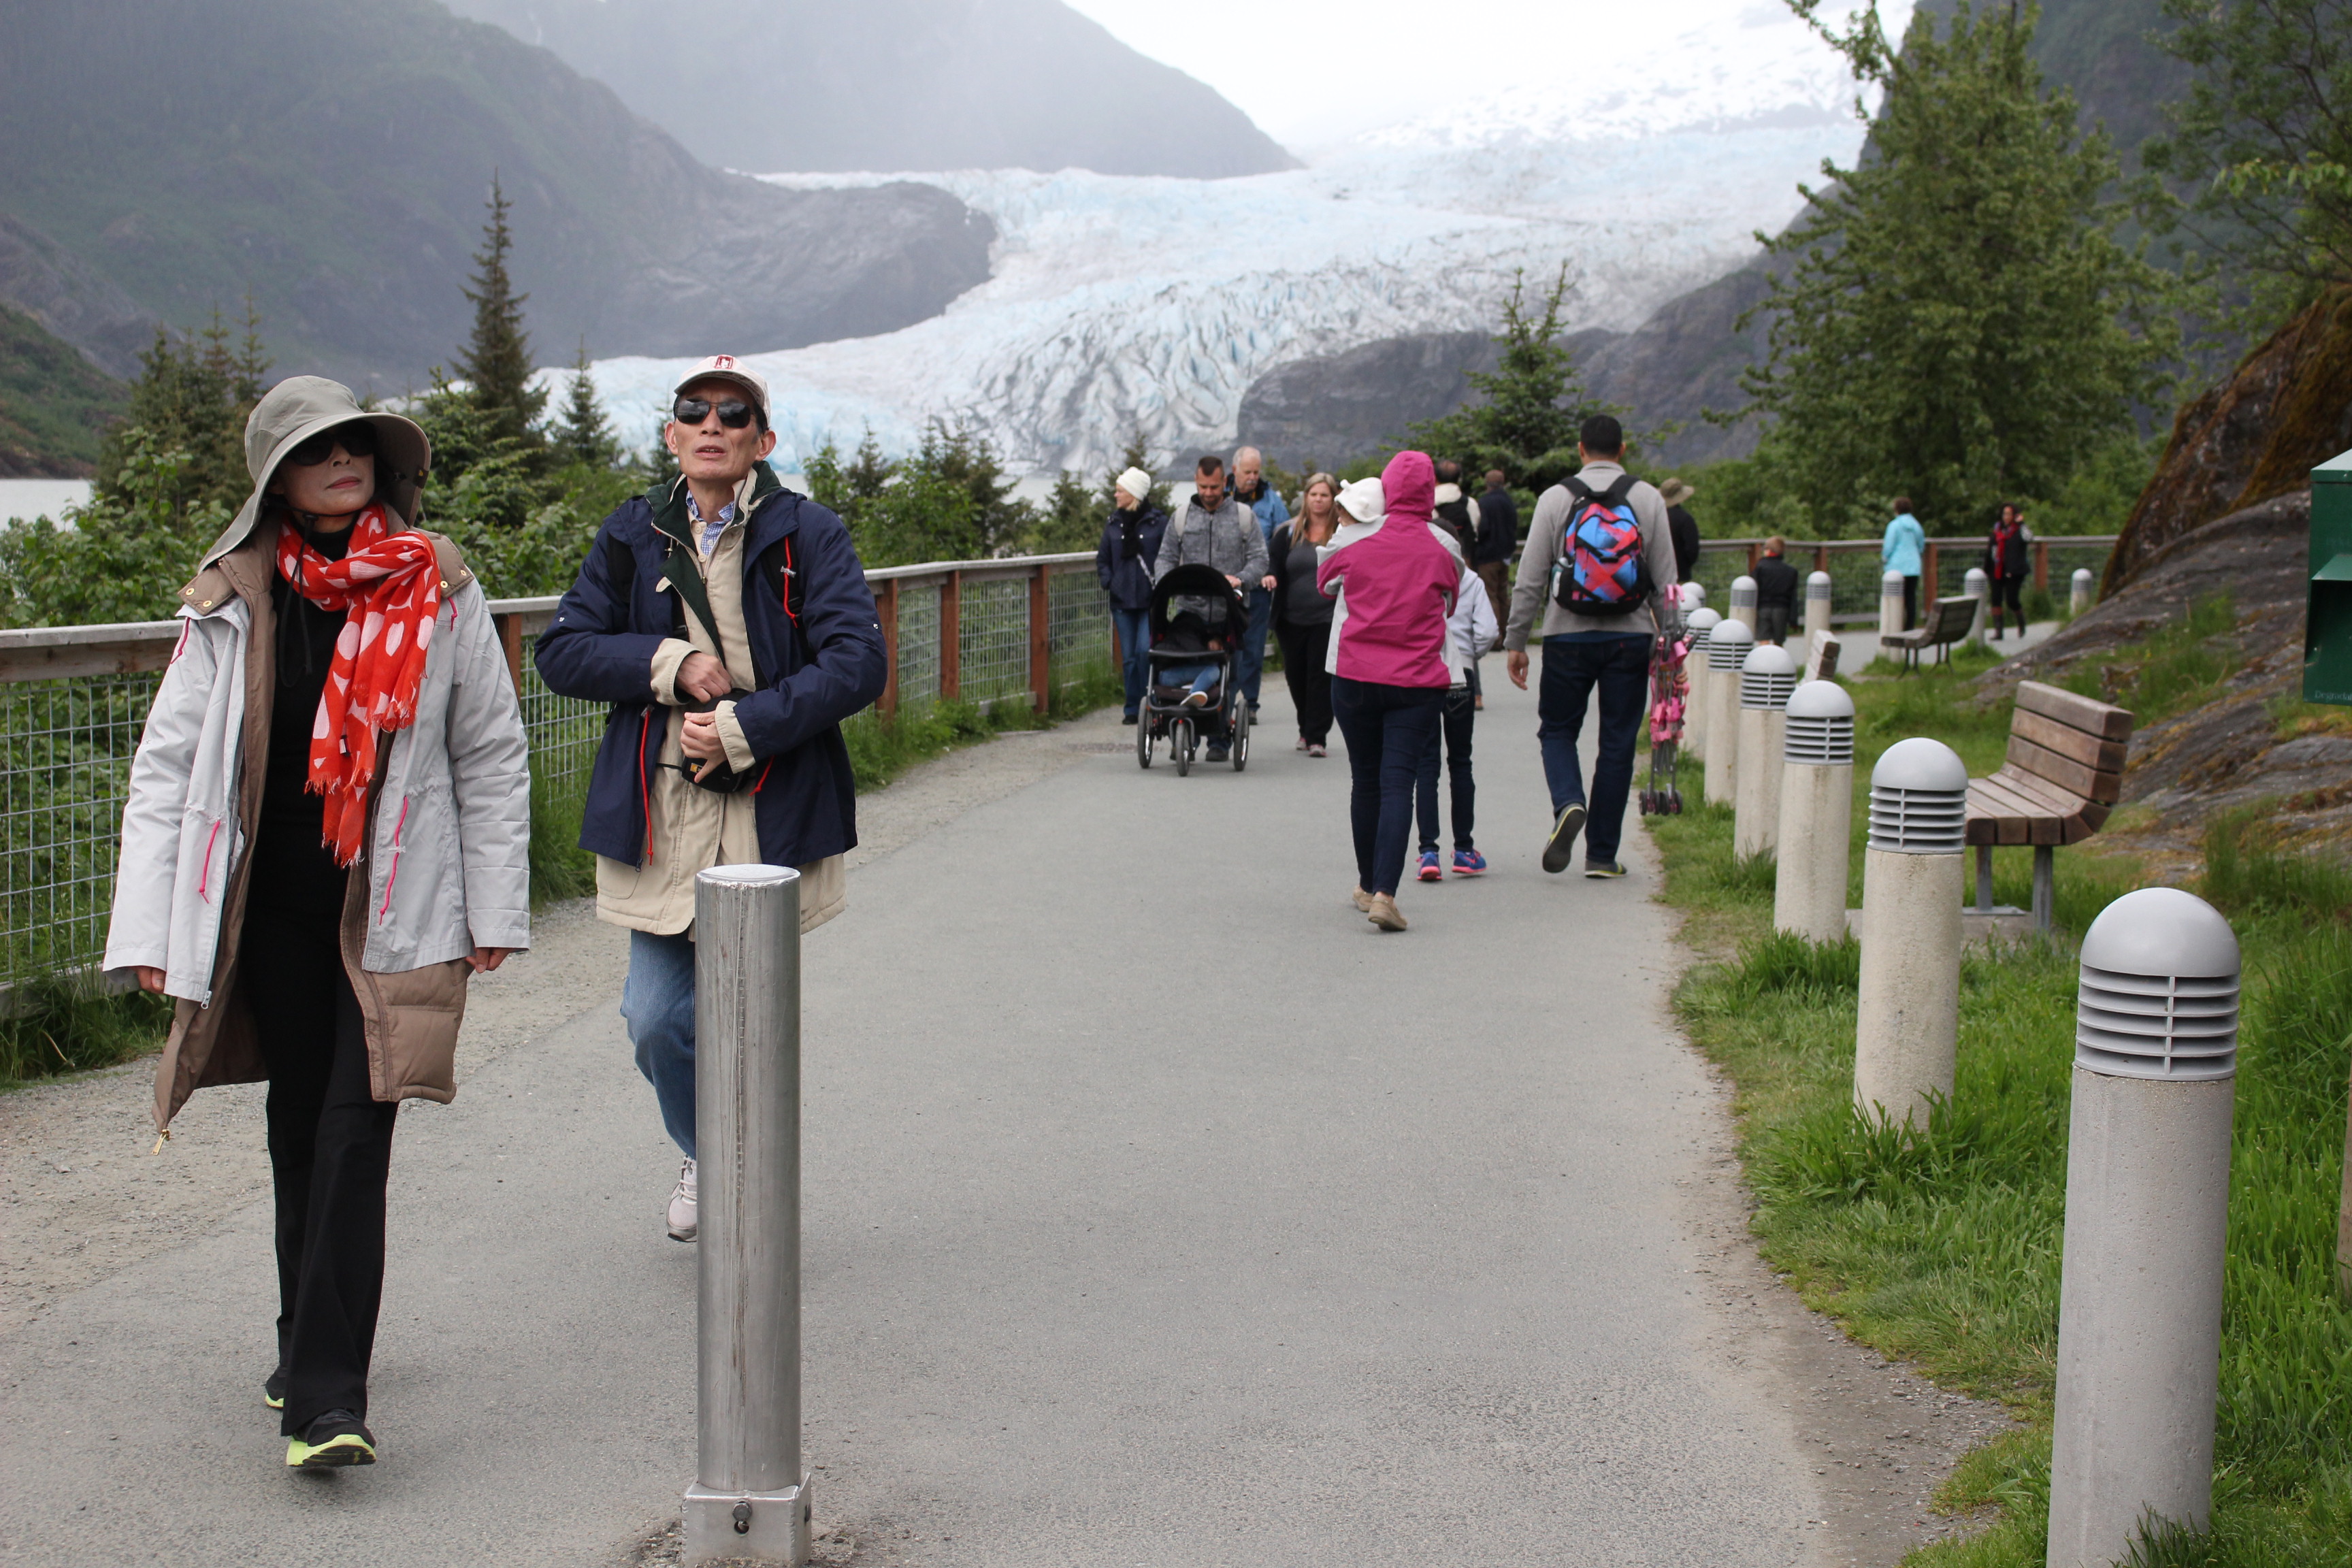 About 80 percent of the people who come to the Mendenhall Glacier in the summer are tourists. (Photo by Elizabeth Jenkins, KTOO - Juneau)